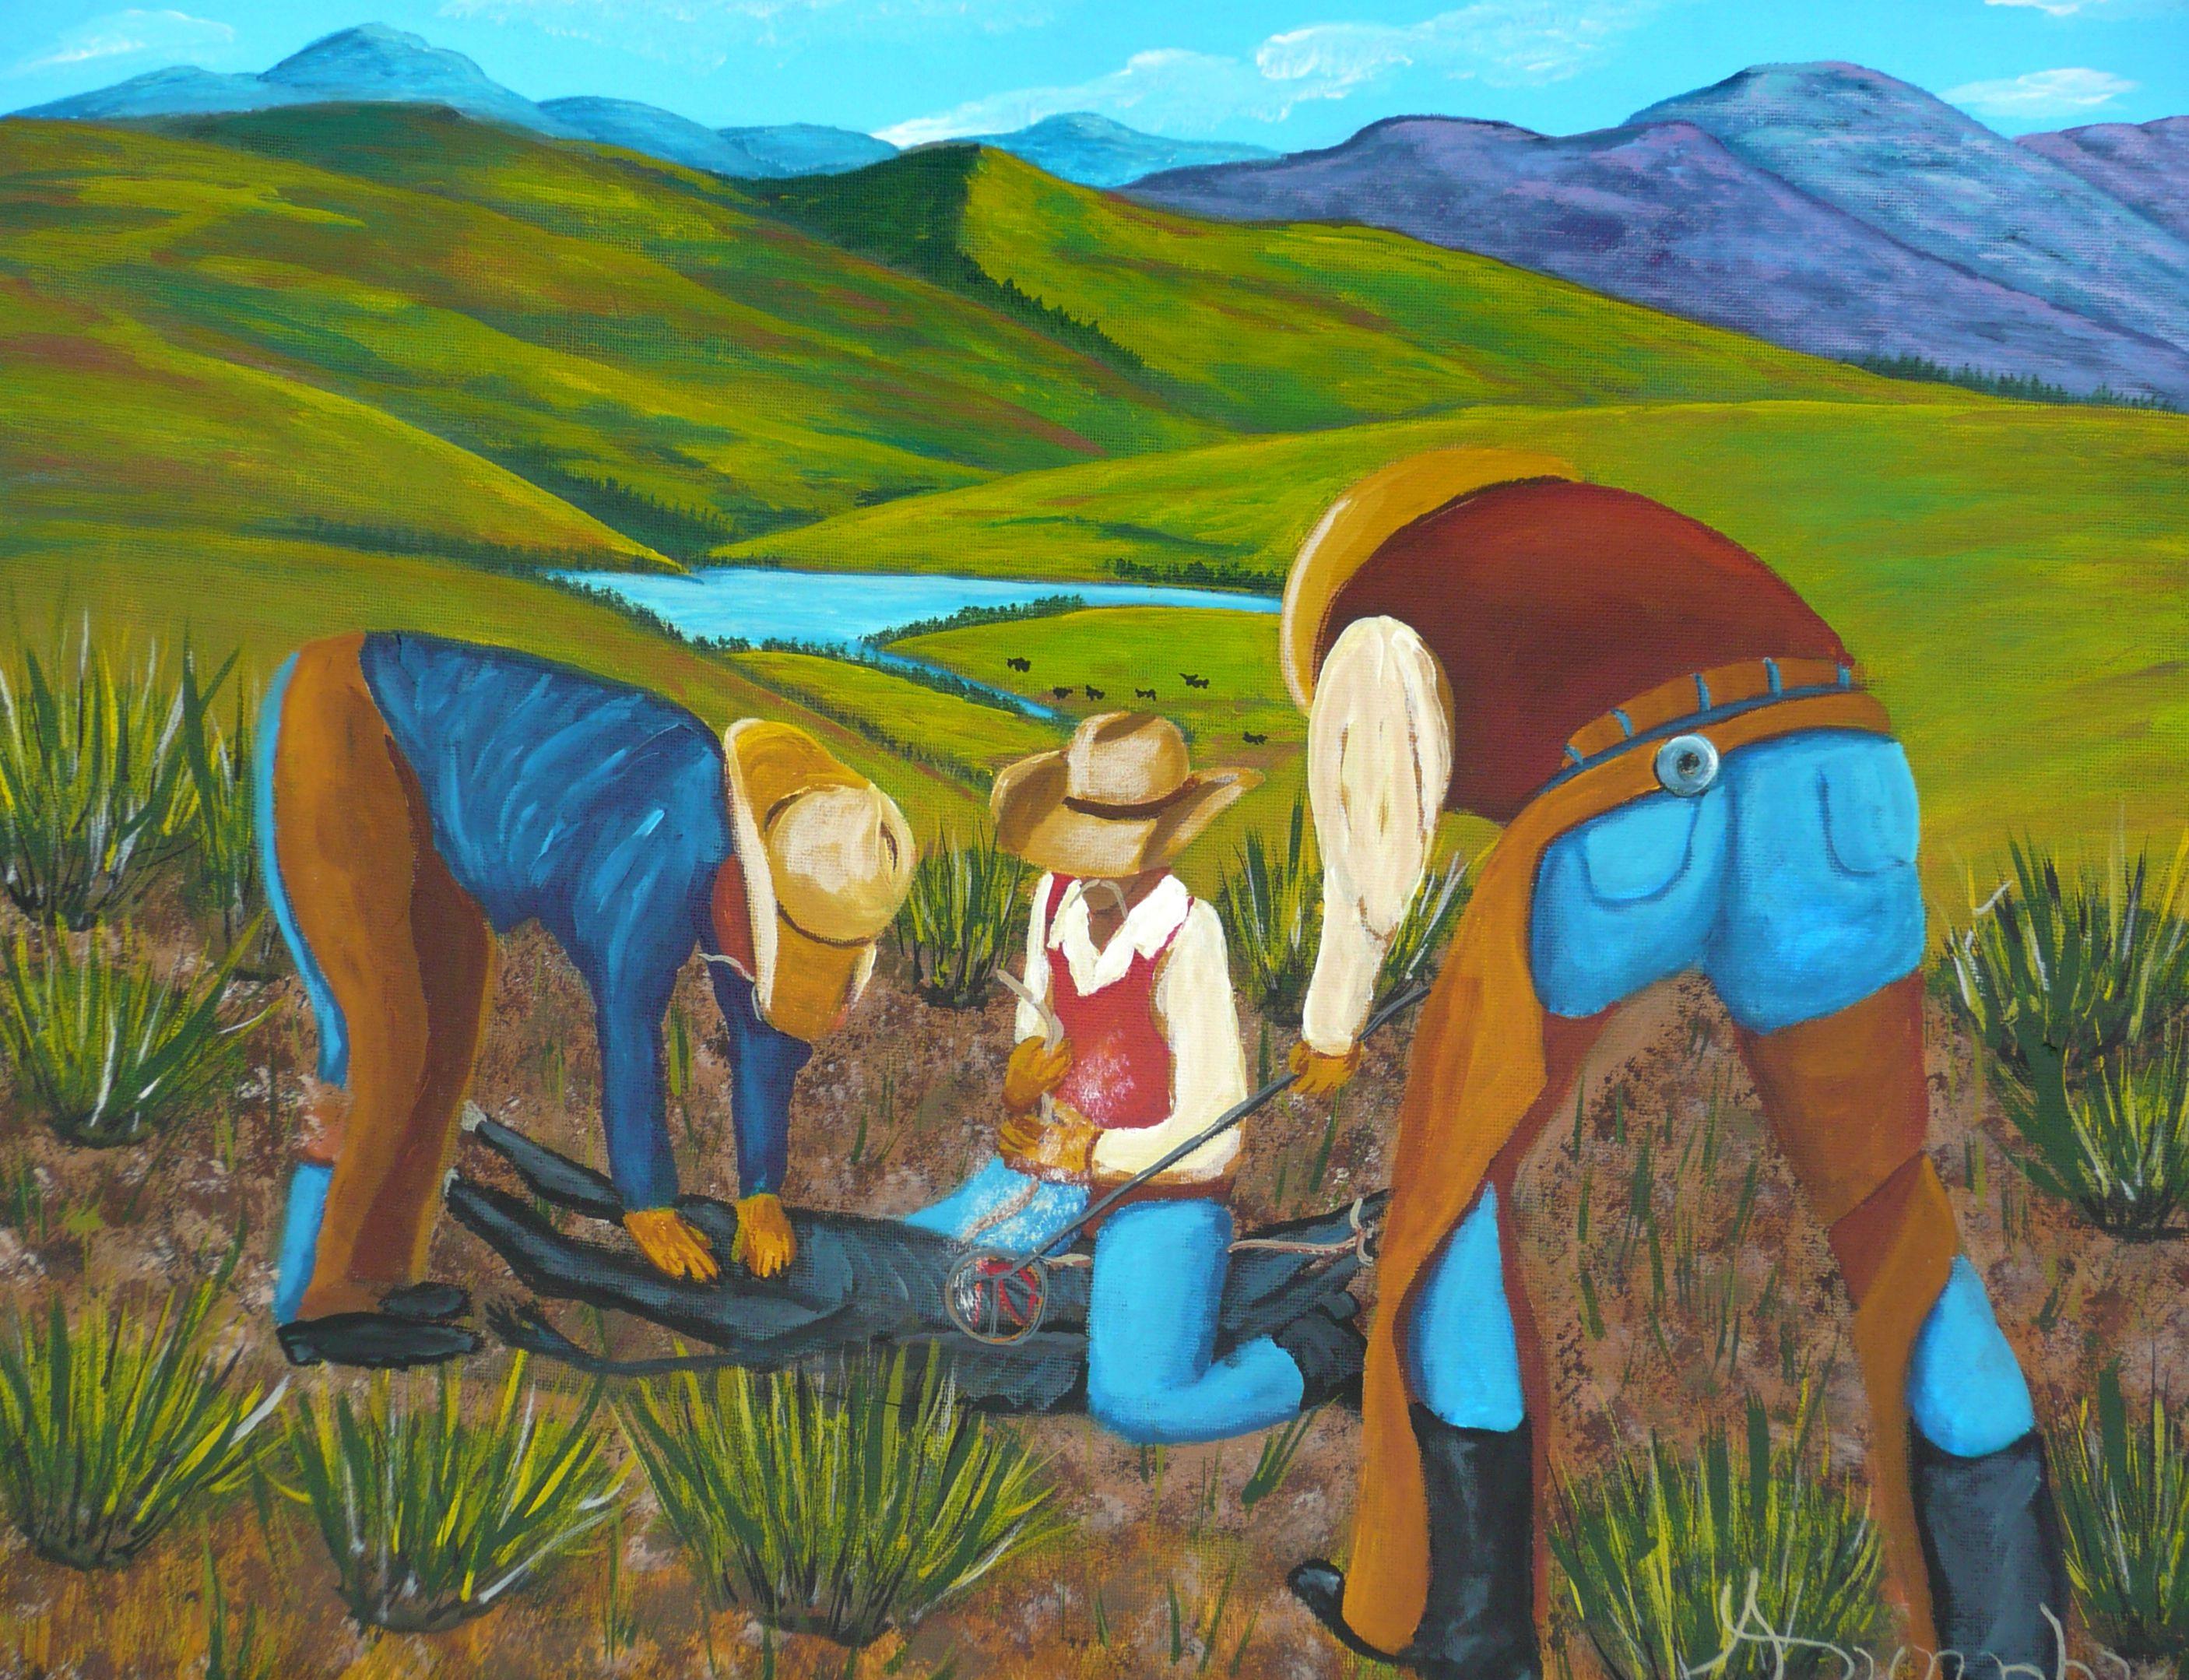 The new calves have been born and the cowhands are rounding them up for branding. This western themed painting depicts a group of ranch hands holding down a calf as the branding iron is applied. This piece has been created using only professional